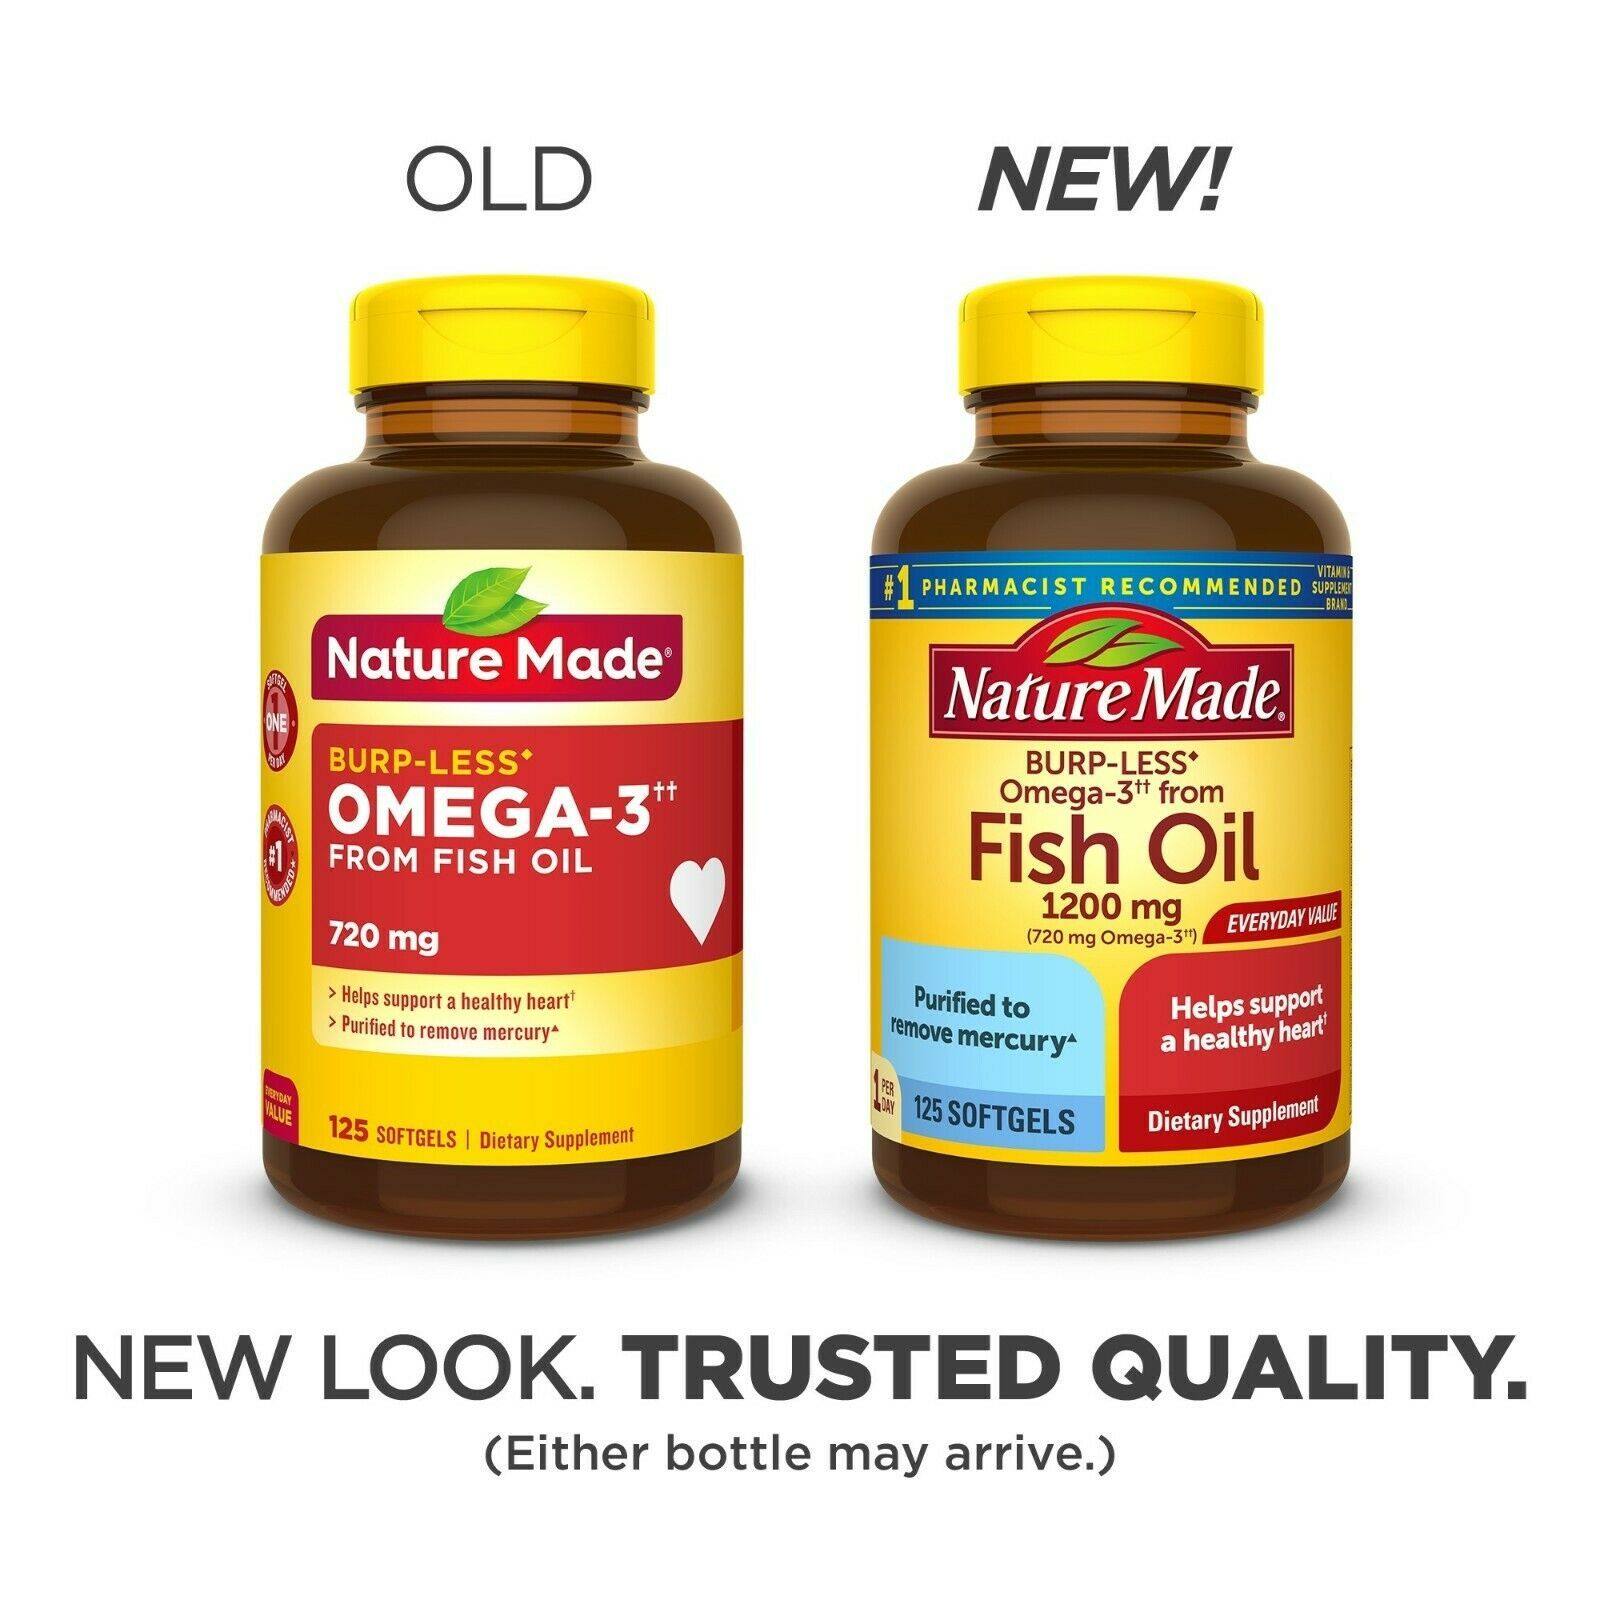 Омега little life. Омега little. Little Омега 3 1000 мг. Omega-3 from Fish Oil 1200mg narxi. Burp less Fish Oil.